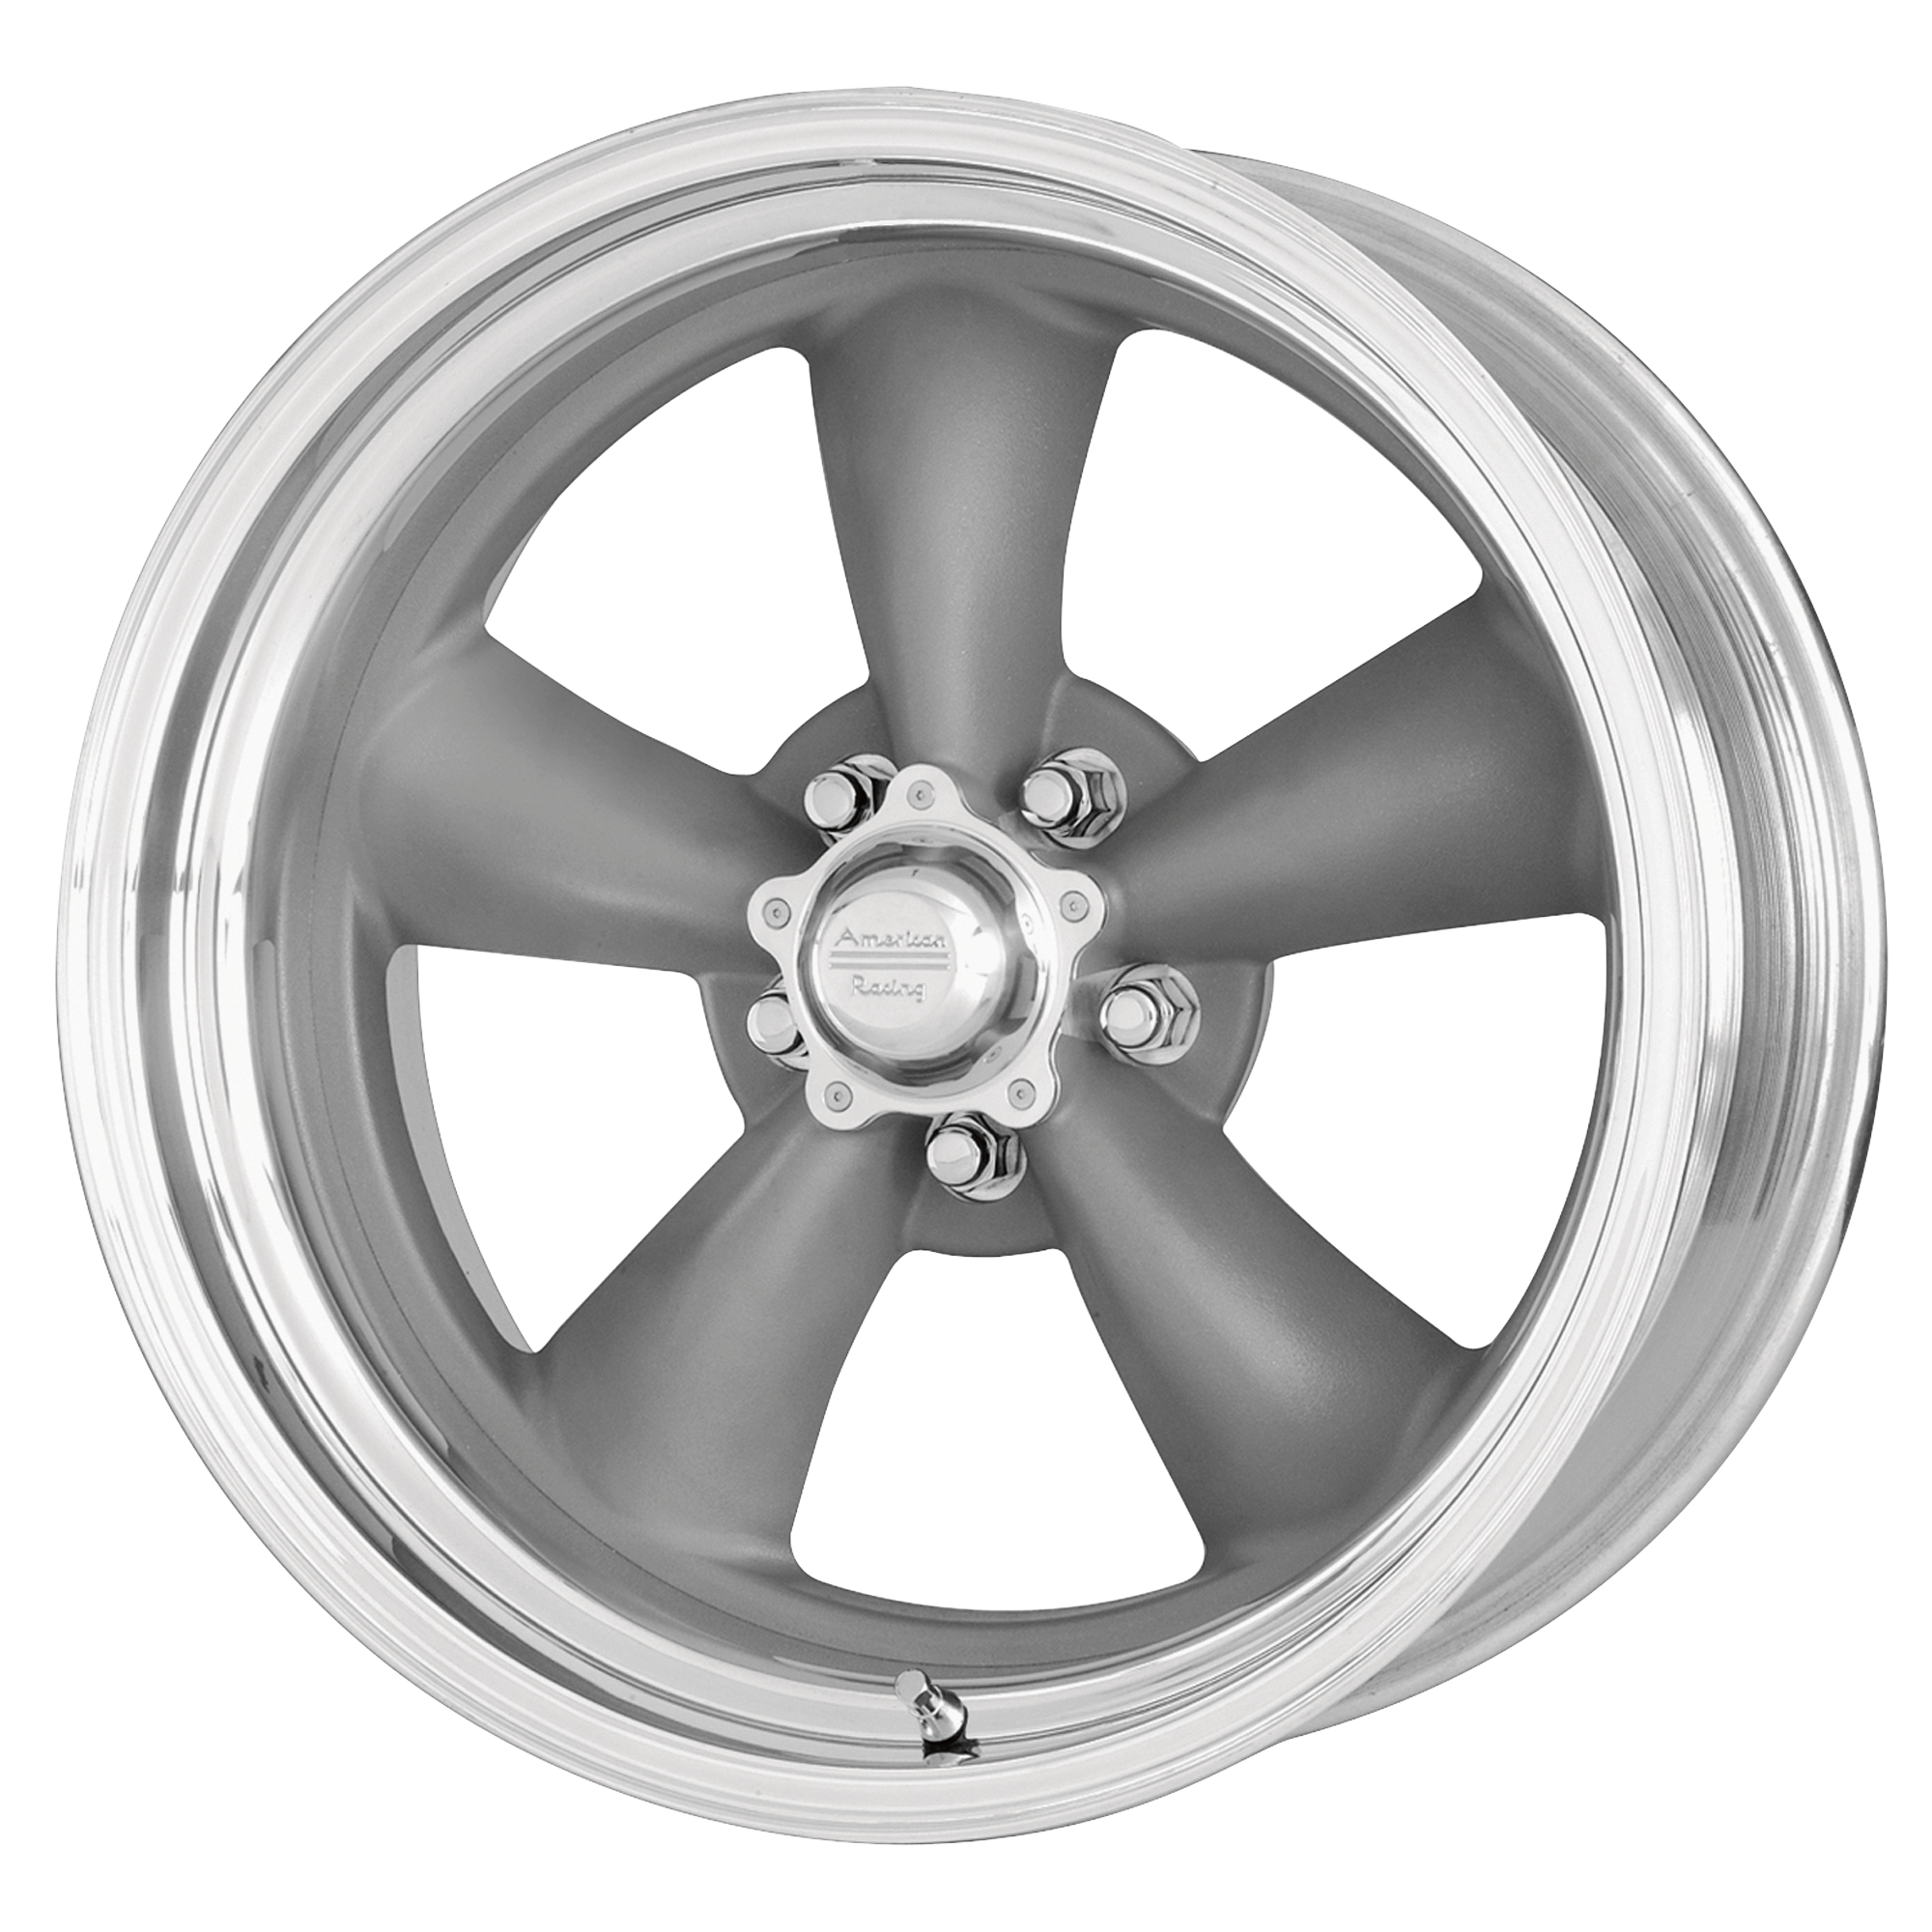 CLASSIC TORQ THRUST II ONE PIECE 17x8 5x127.00 MAG GRAY W/ MACHINED LIP (14 mm) - Tires and Engine Performance